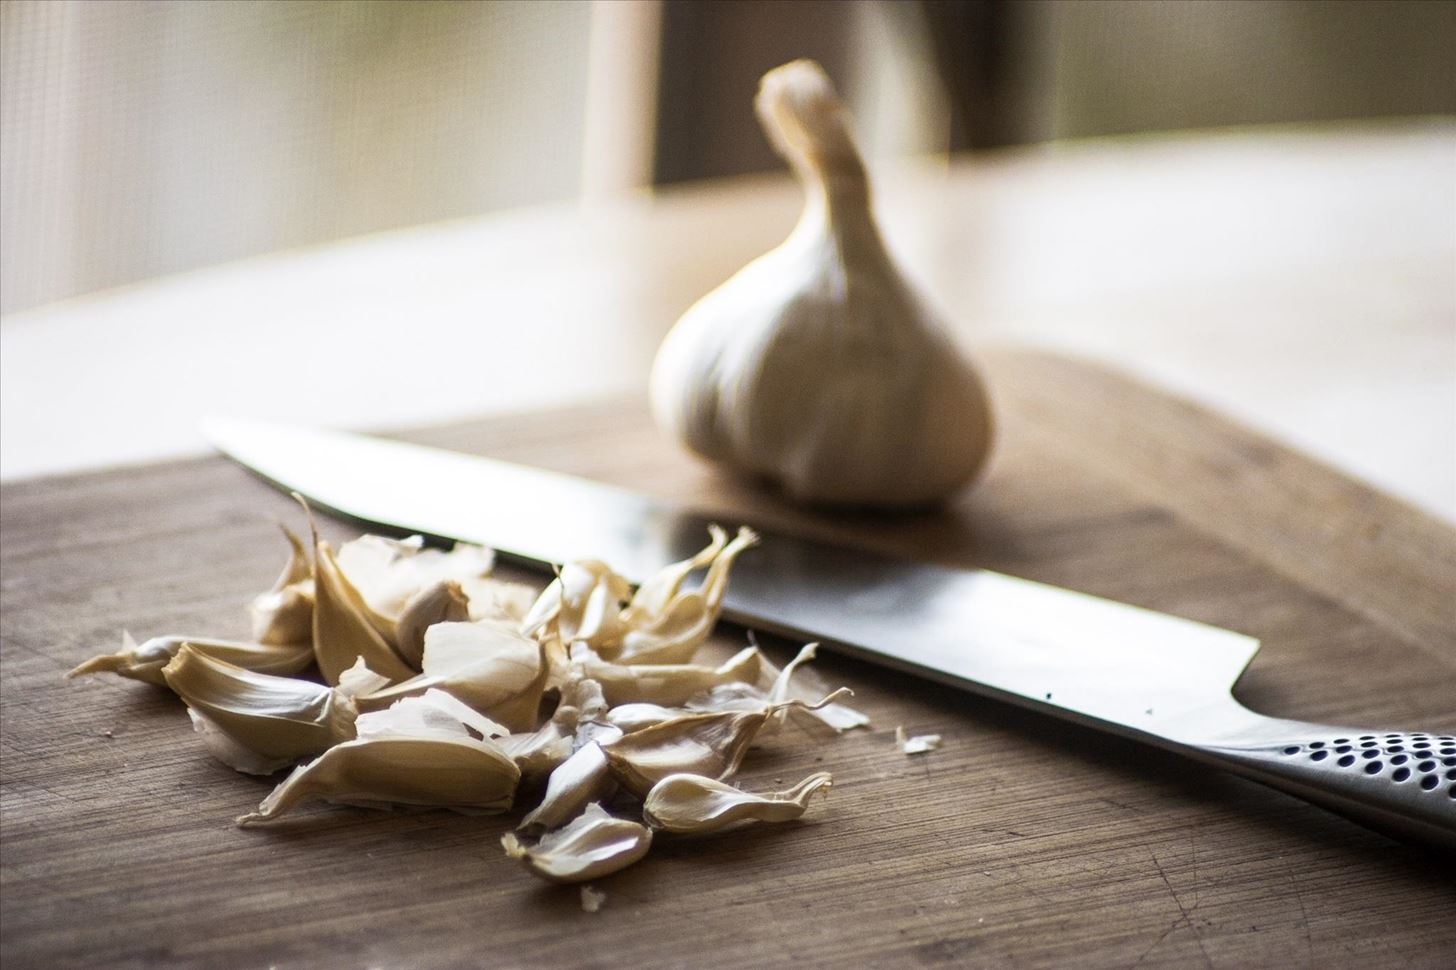 How to Make Amazing Garlic Paste Without a Clunky Garlic Press